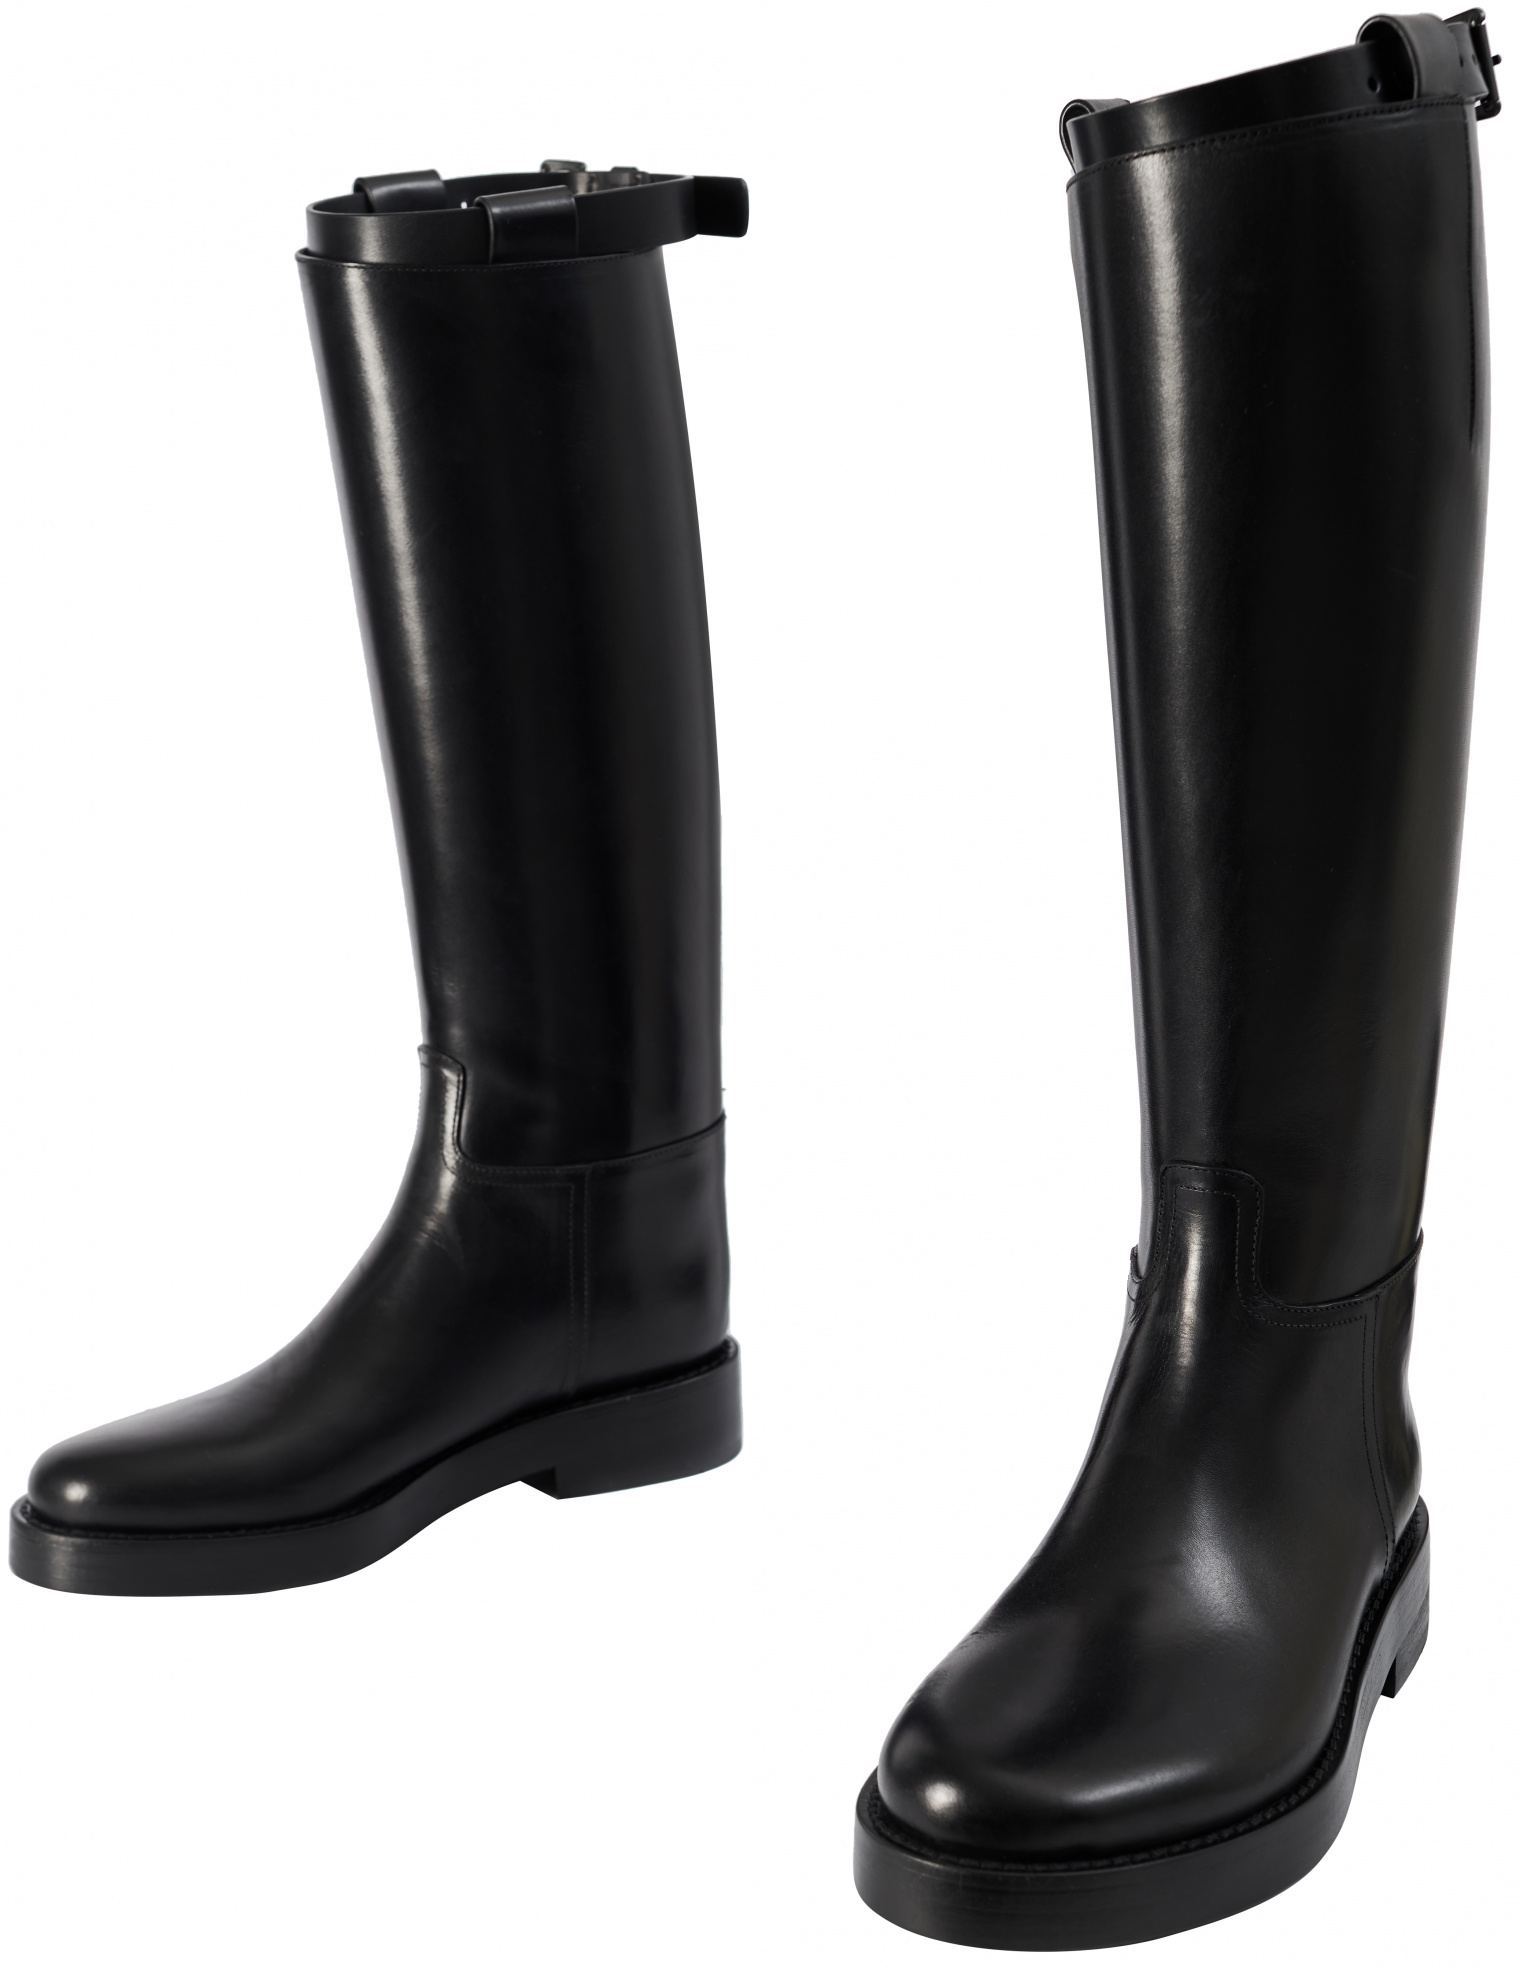 Ann Demeulemeester Black leather high boots